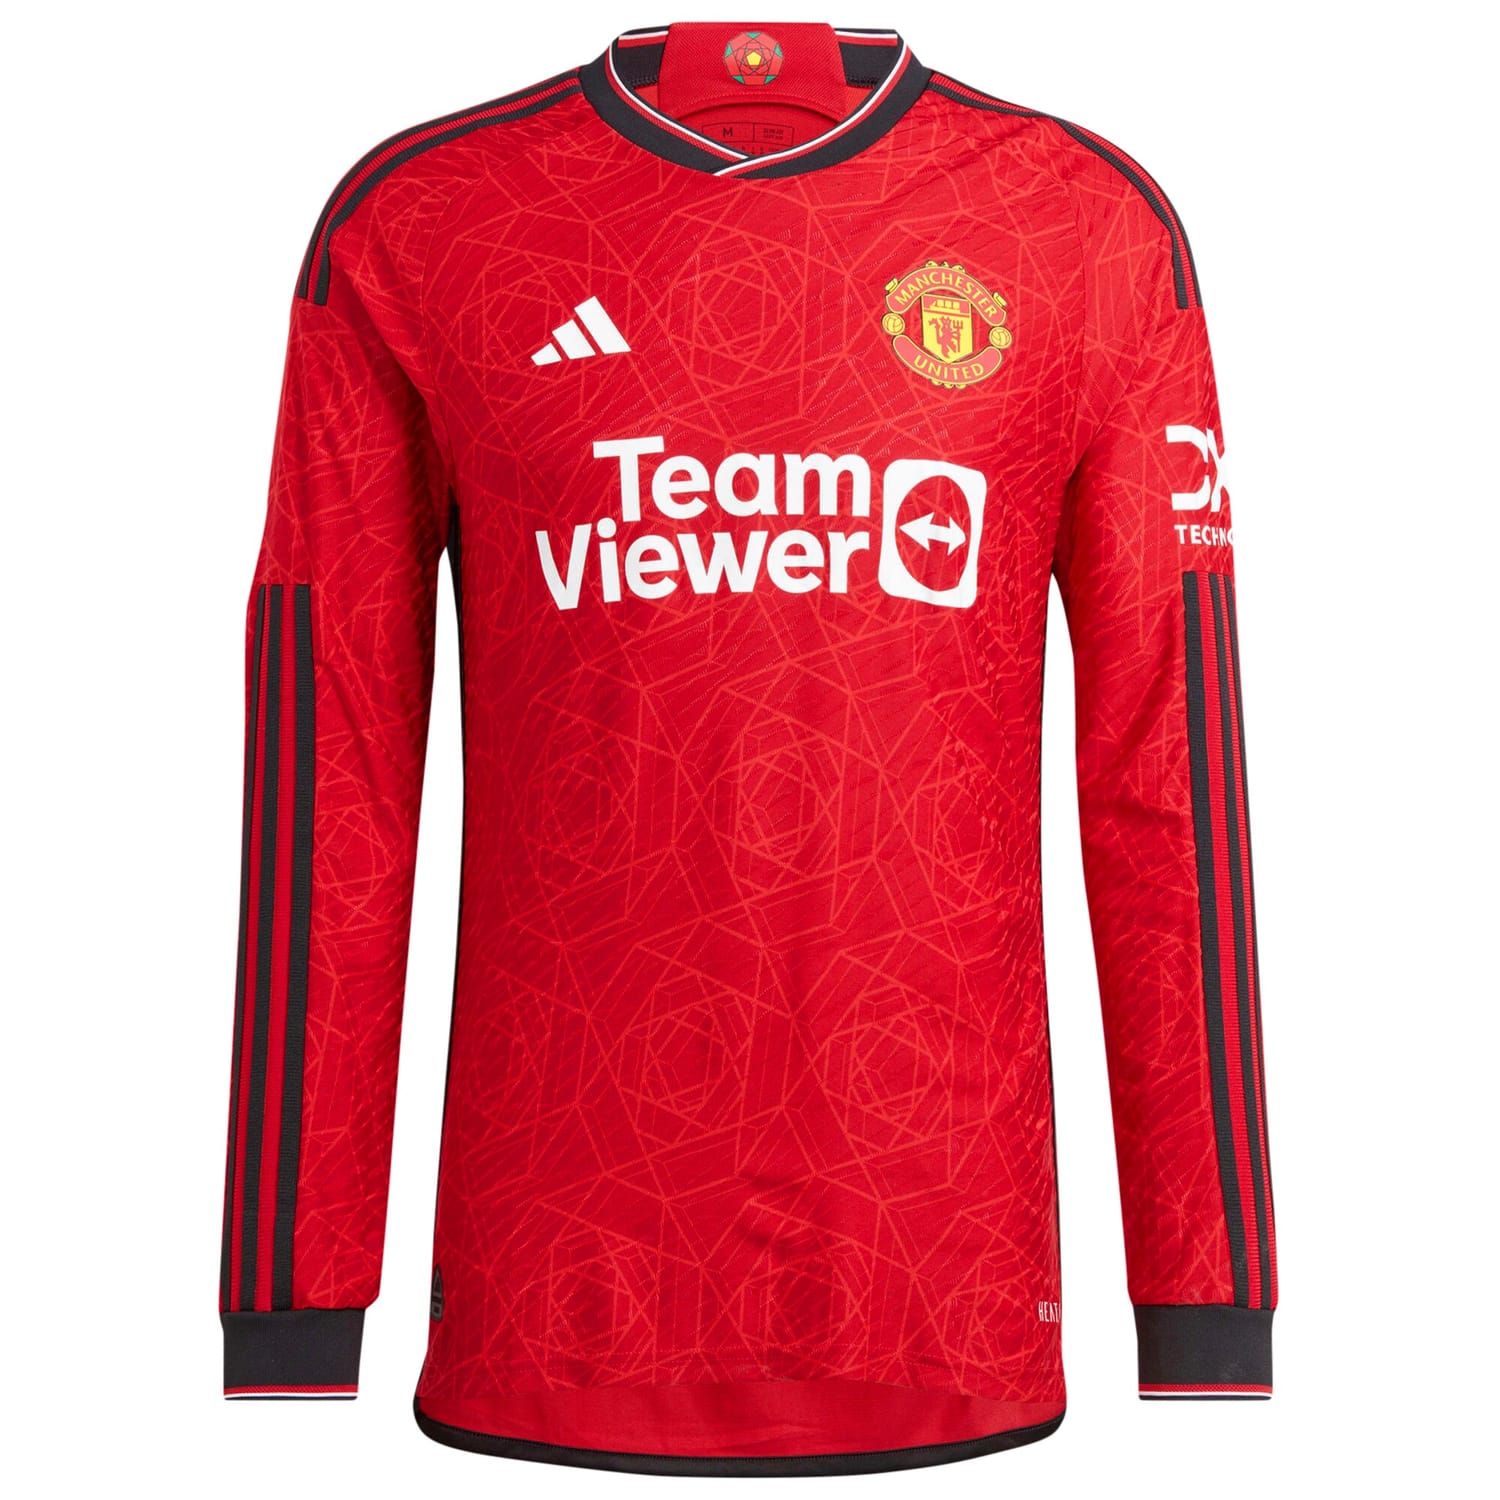 Premier League Manchester United Home Cup Authentic Jersey Shirt Long Sleeve 2023-24 player Gabrielle George printing for Men